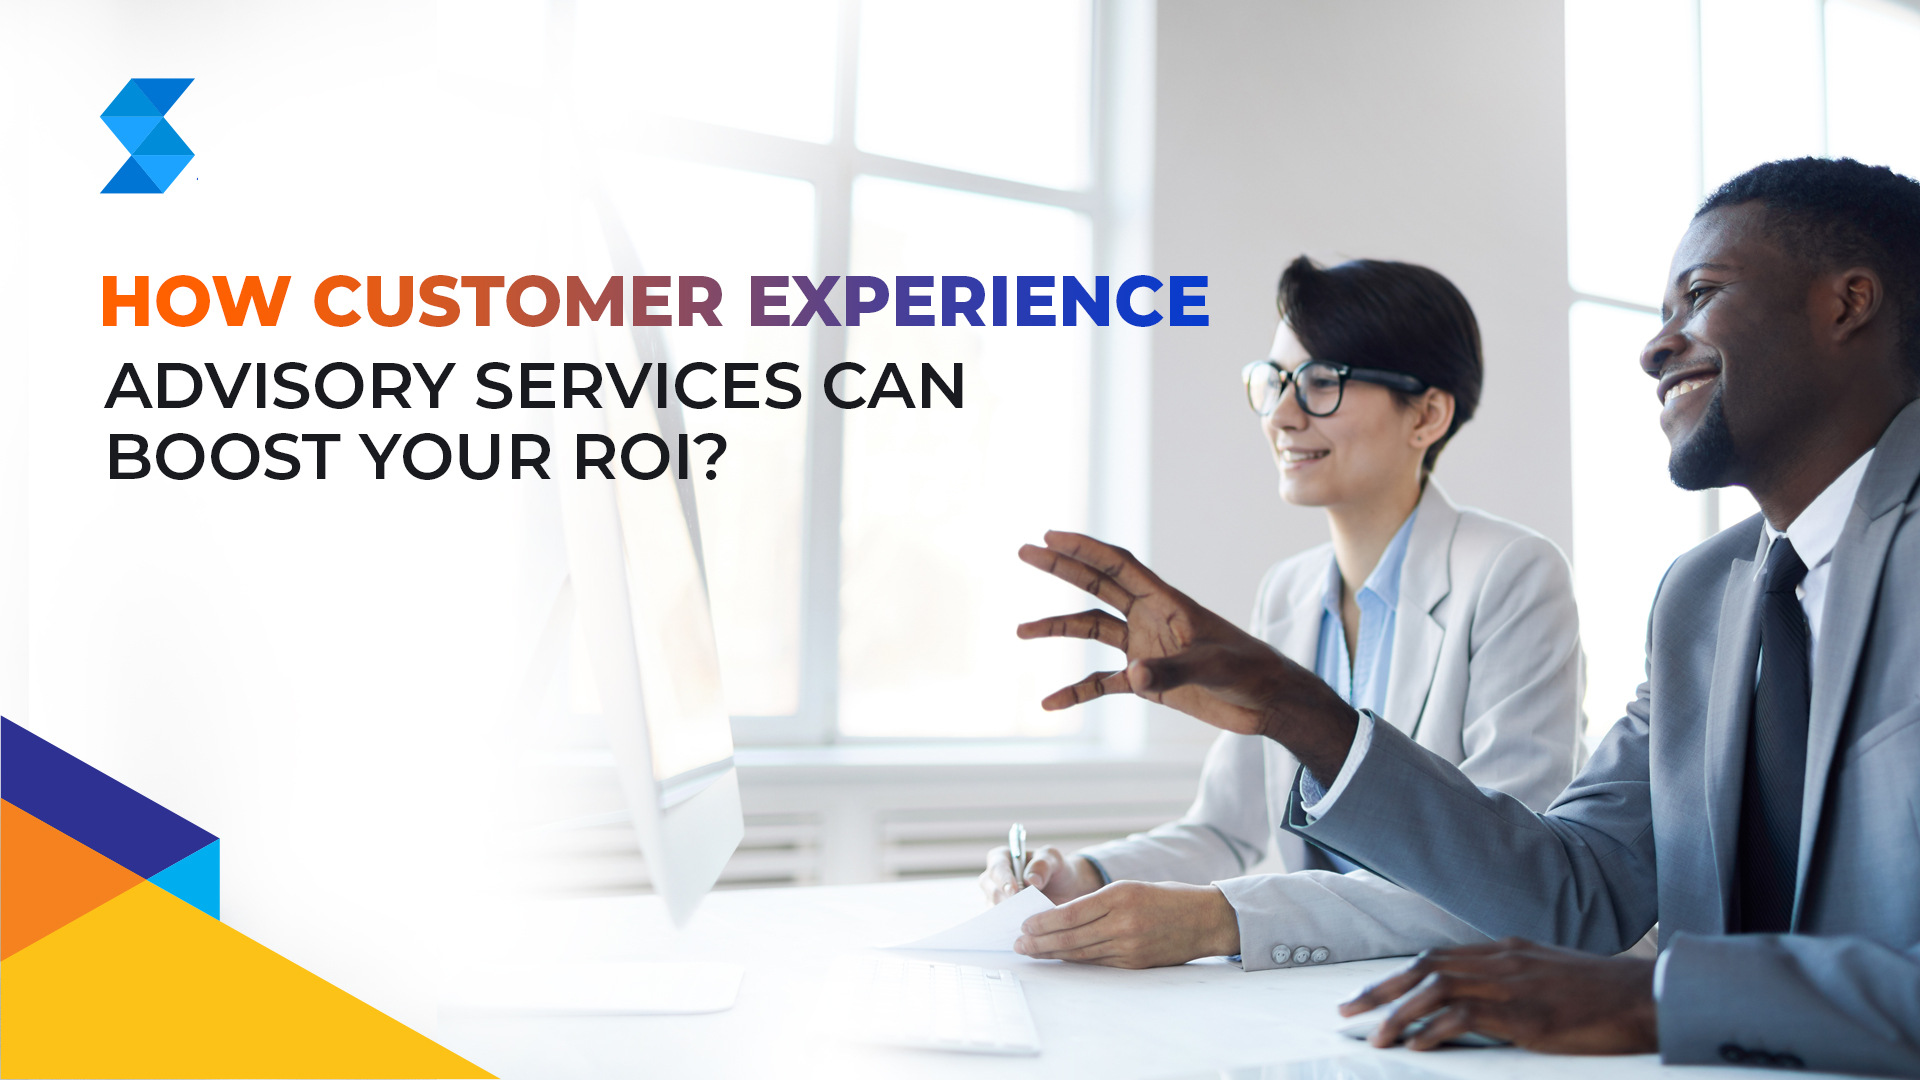 How can Customer Experience Advisory Services boost your ROI?